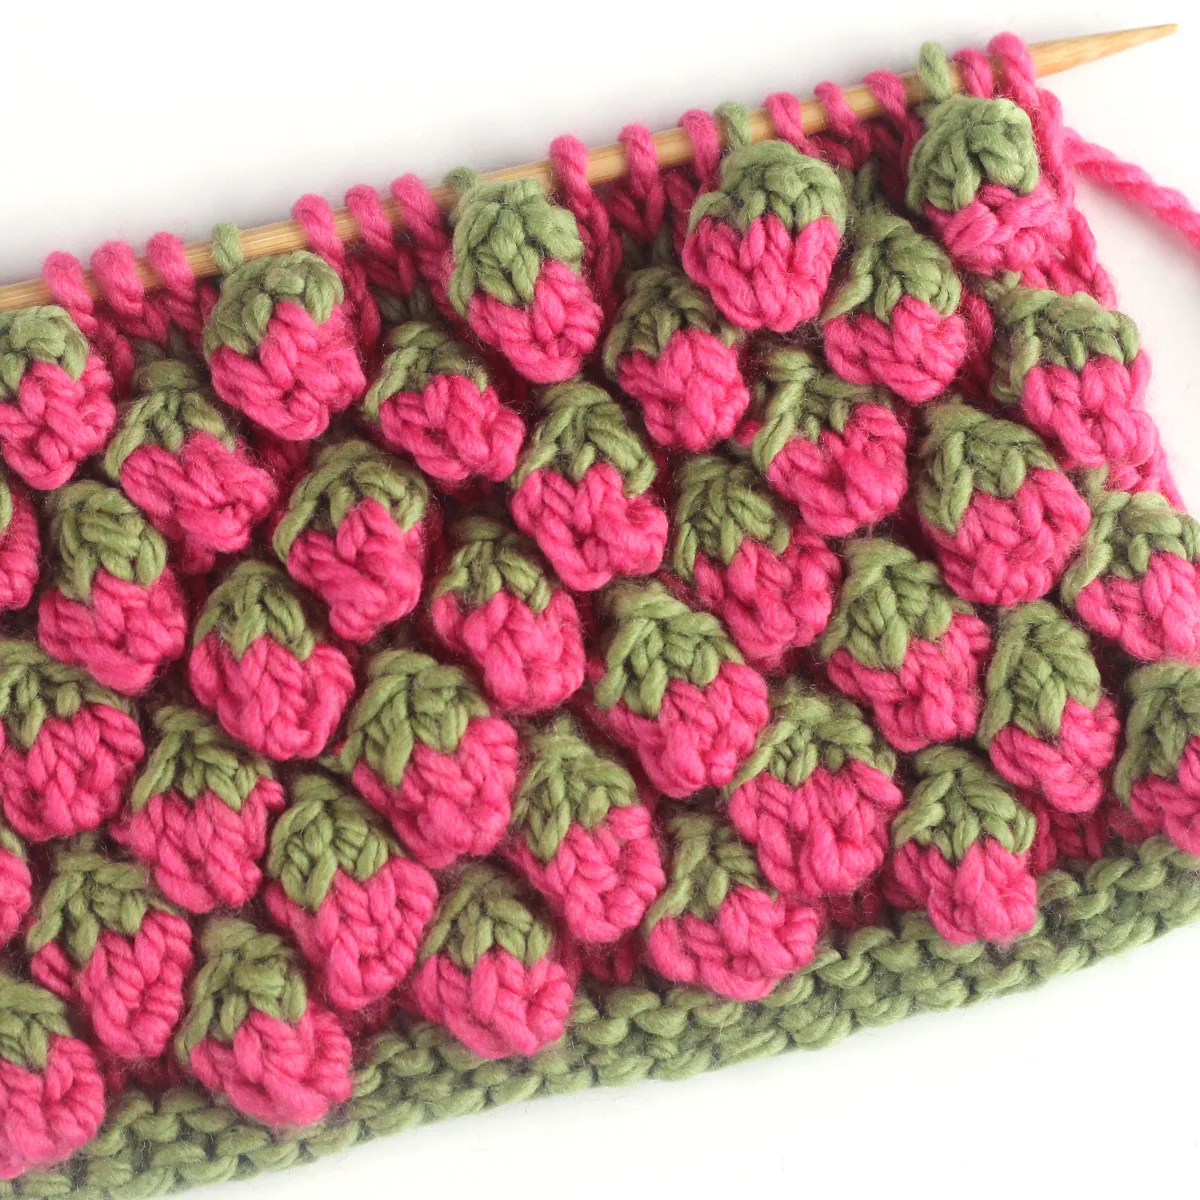 Strawberry knit stitch bobble pattern in pink and green colored yarn on a knitting needle.